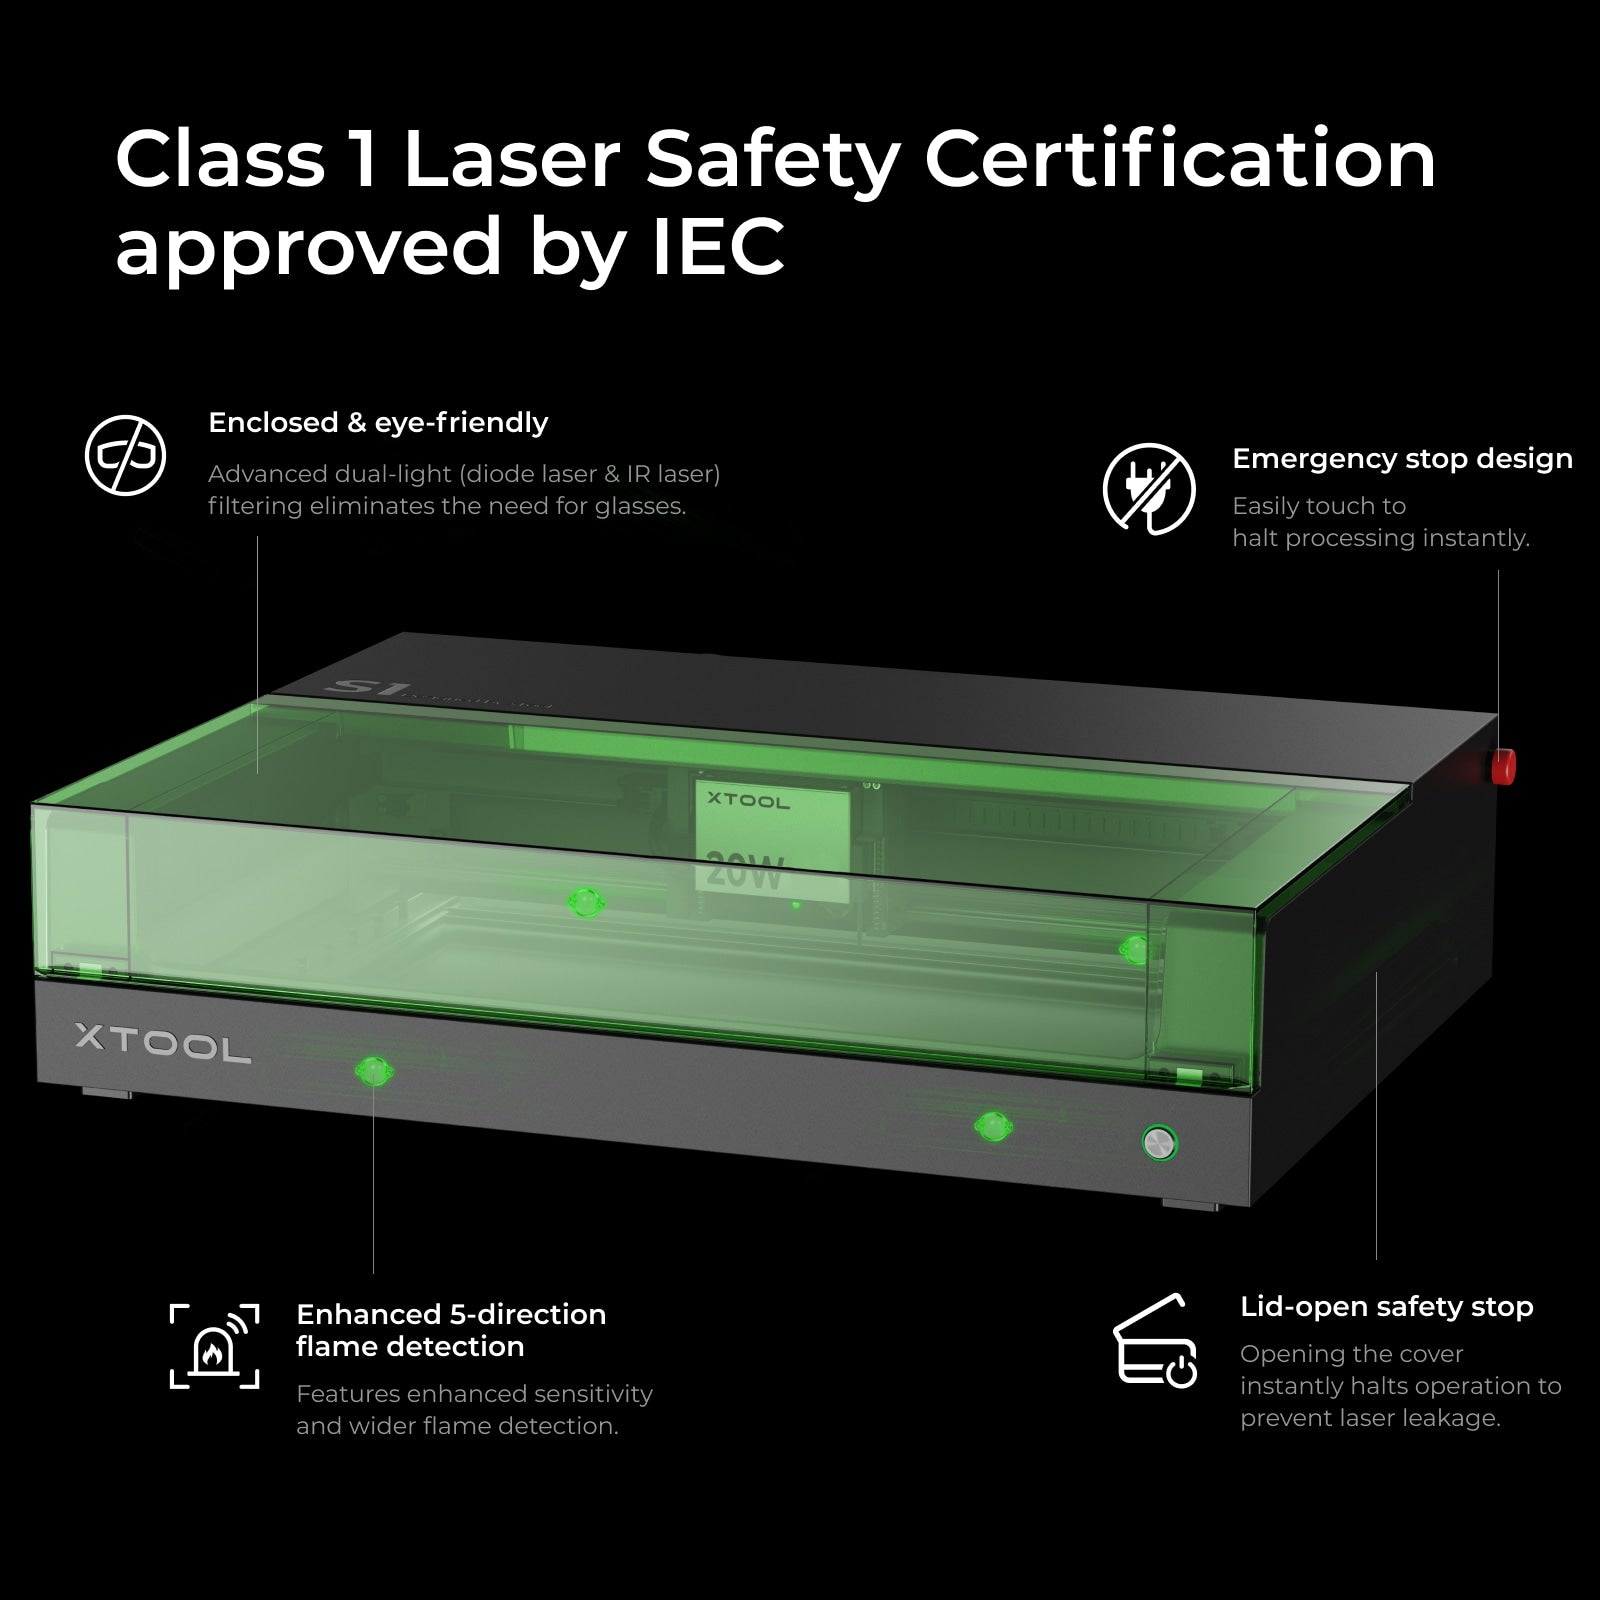 xTool S1 20W Enclosed Diode Laser Cutter